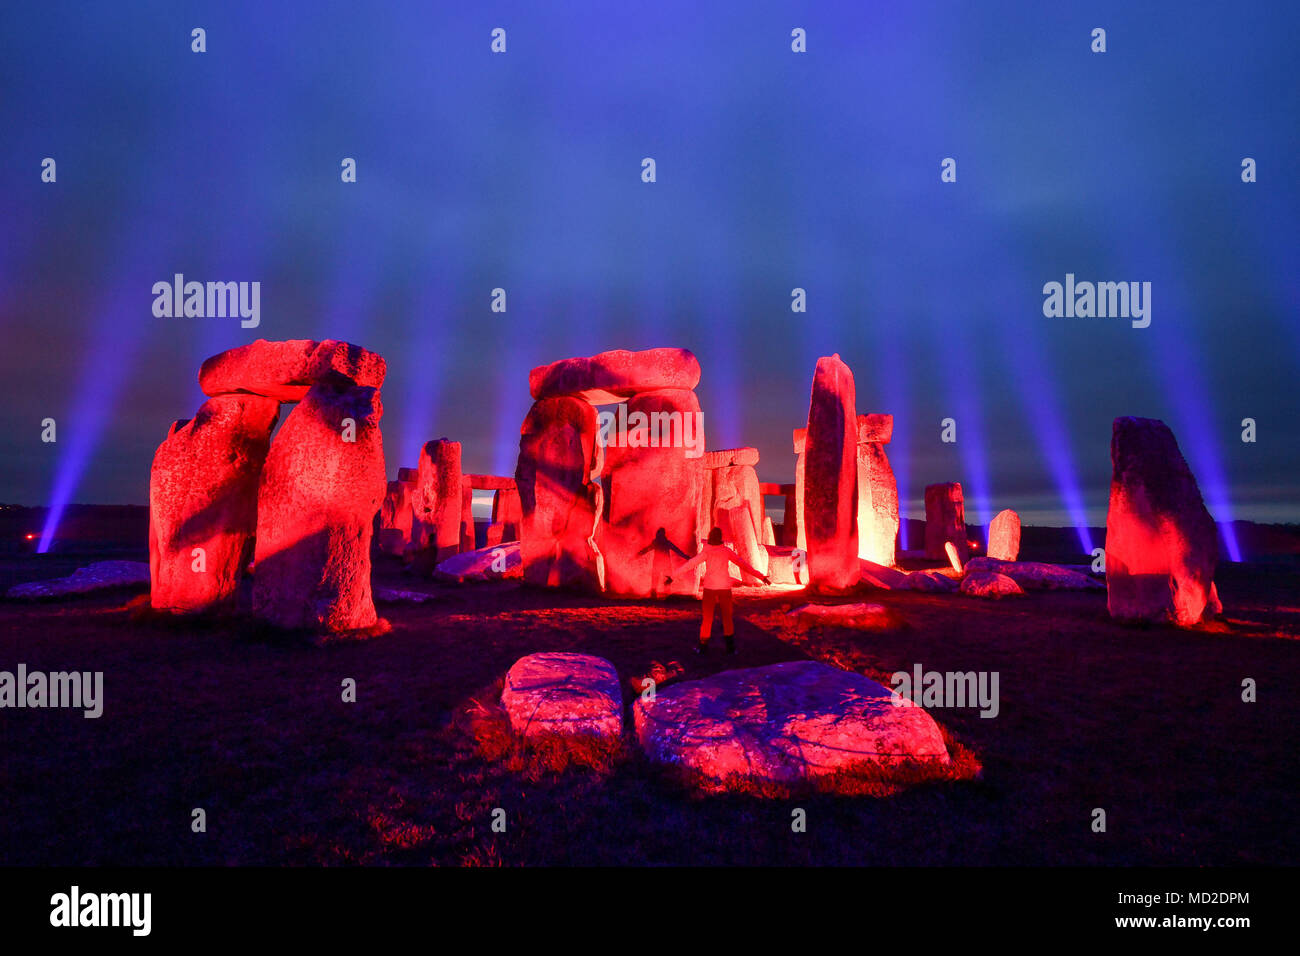 Stonehenge in Wiltshire is lit up by Finnish light artist Kari Kola to mark UNESCO World Heritage Day and as part of activities to mark 100 years of care and conservation to the prehistoric monument. Stock Photo